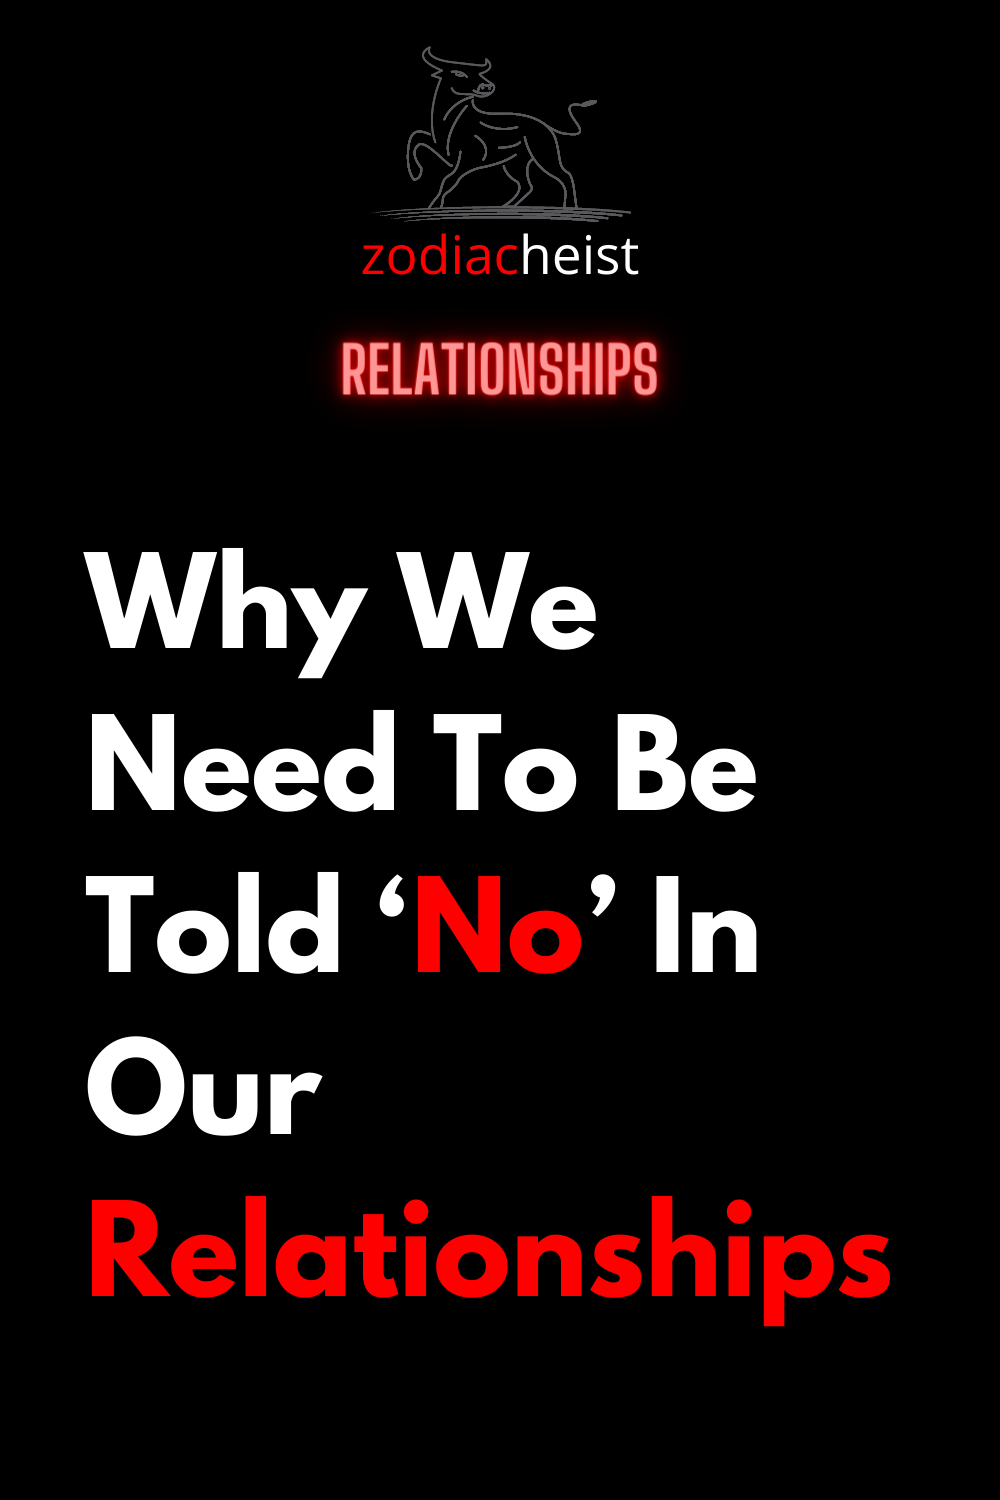 Why We Need To Be Told ‘No’ In Our Relationships